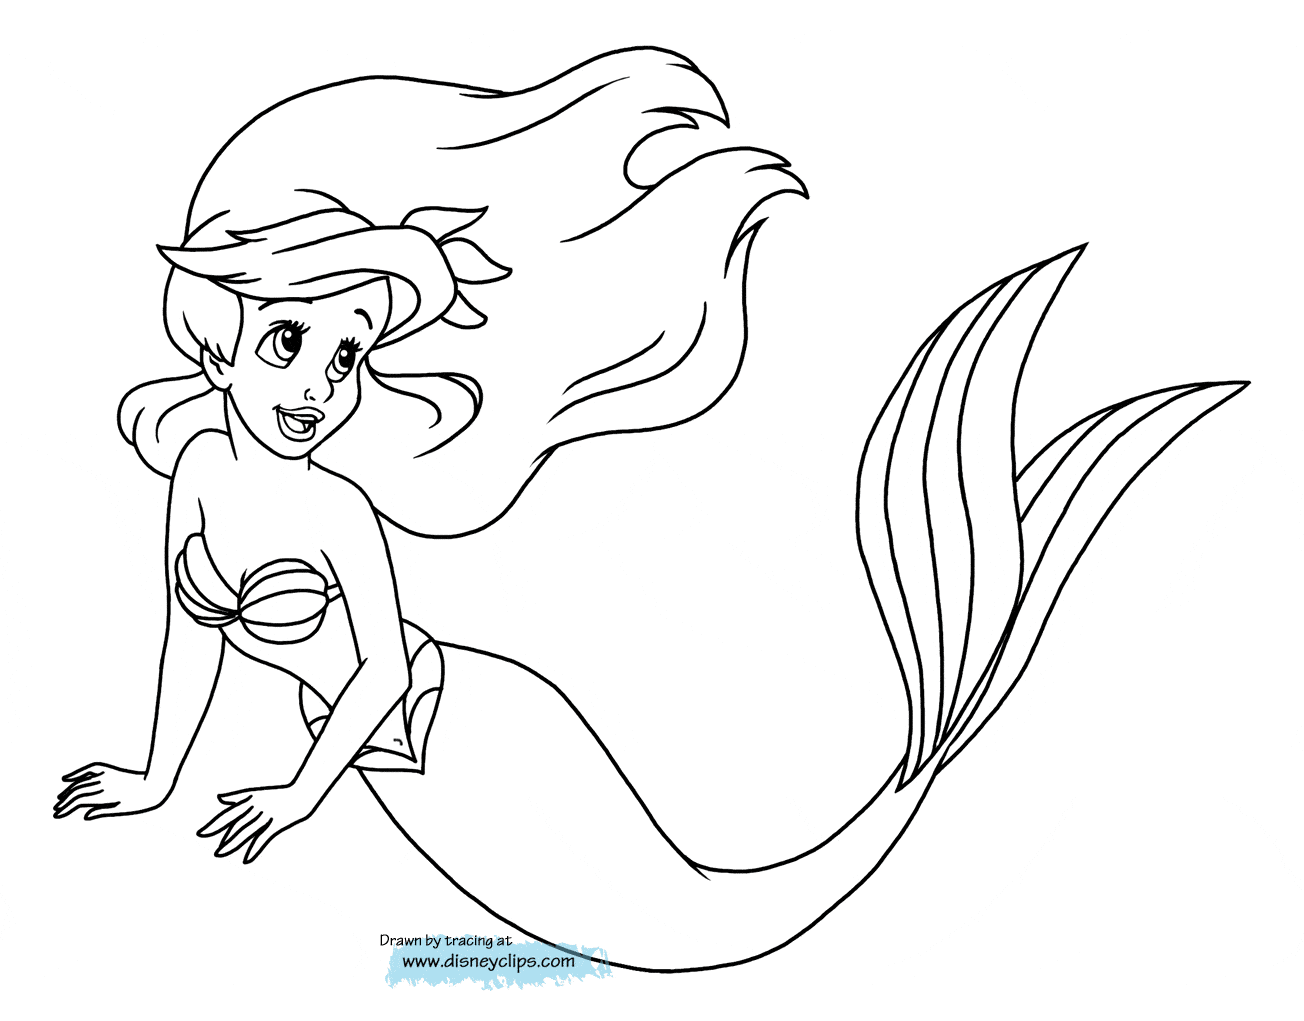 The Little Mermaid Coloring Pages (4)  Disneyclips.com